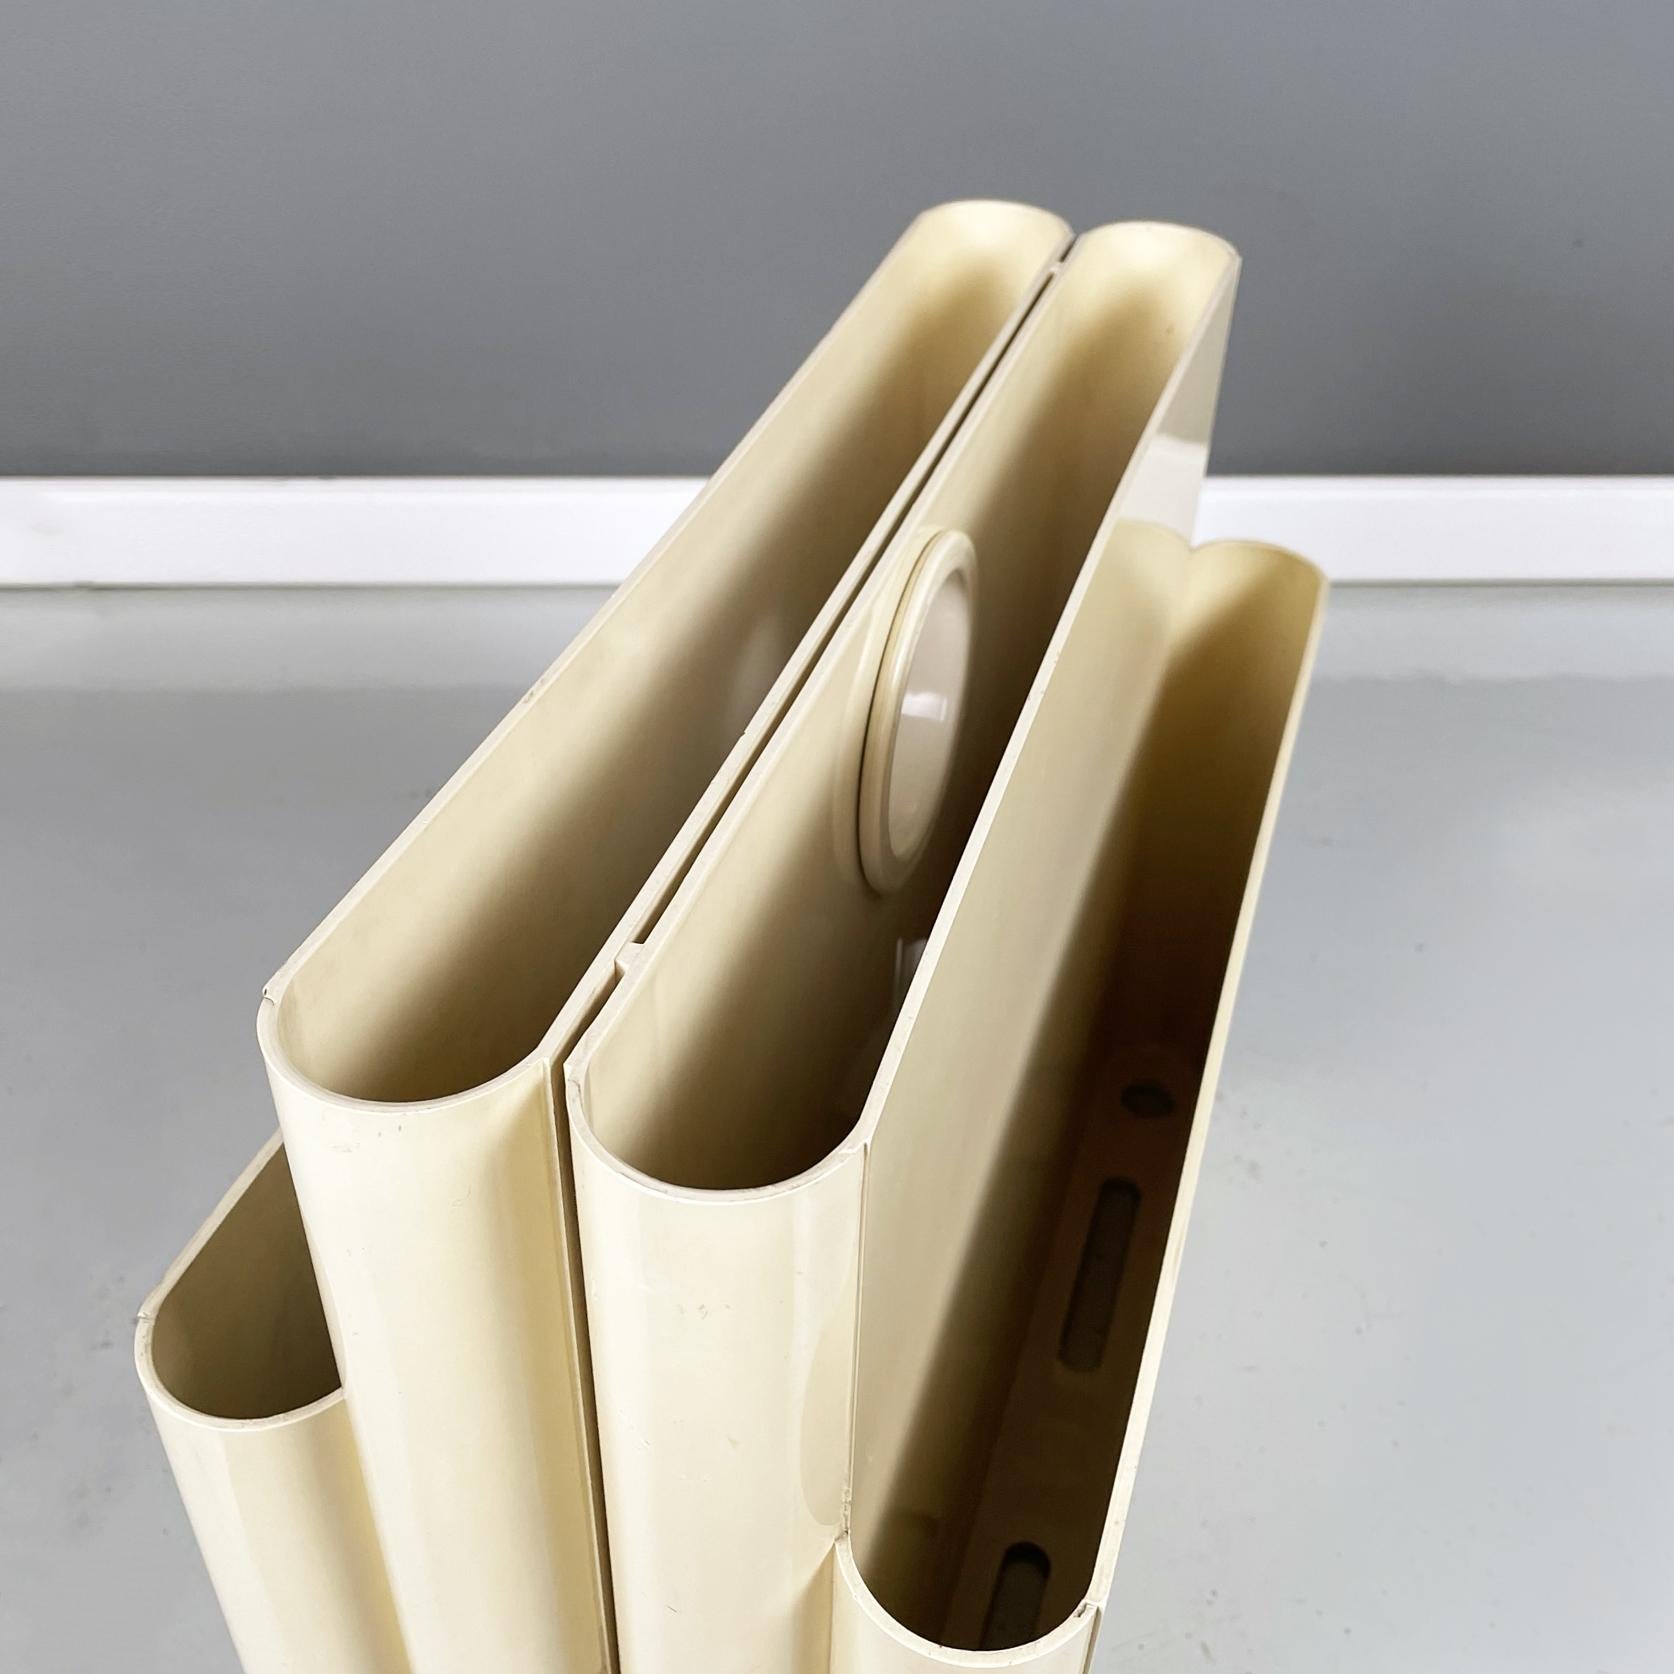 Late 20th Century Italian Modern Plastic Magazine Rack 4676 by Giotto Stoppino for Kartell, 1970s